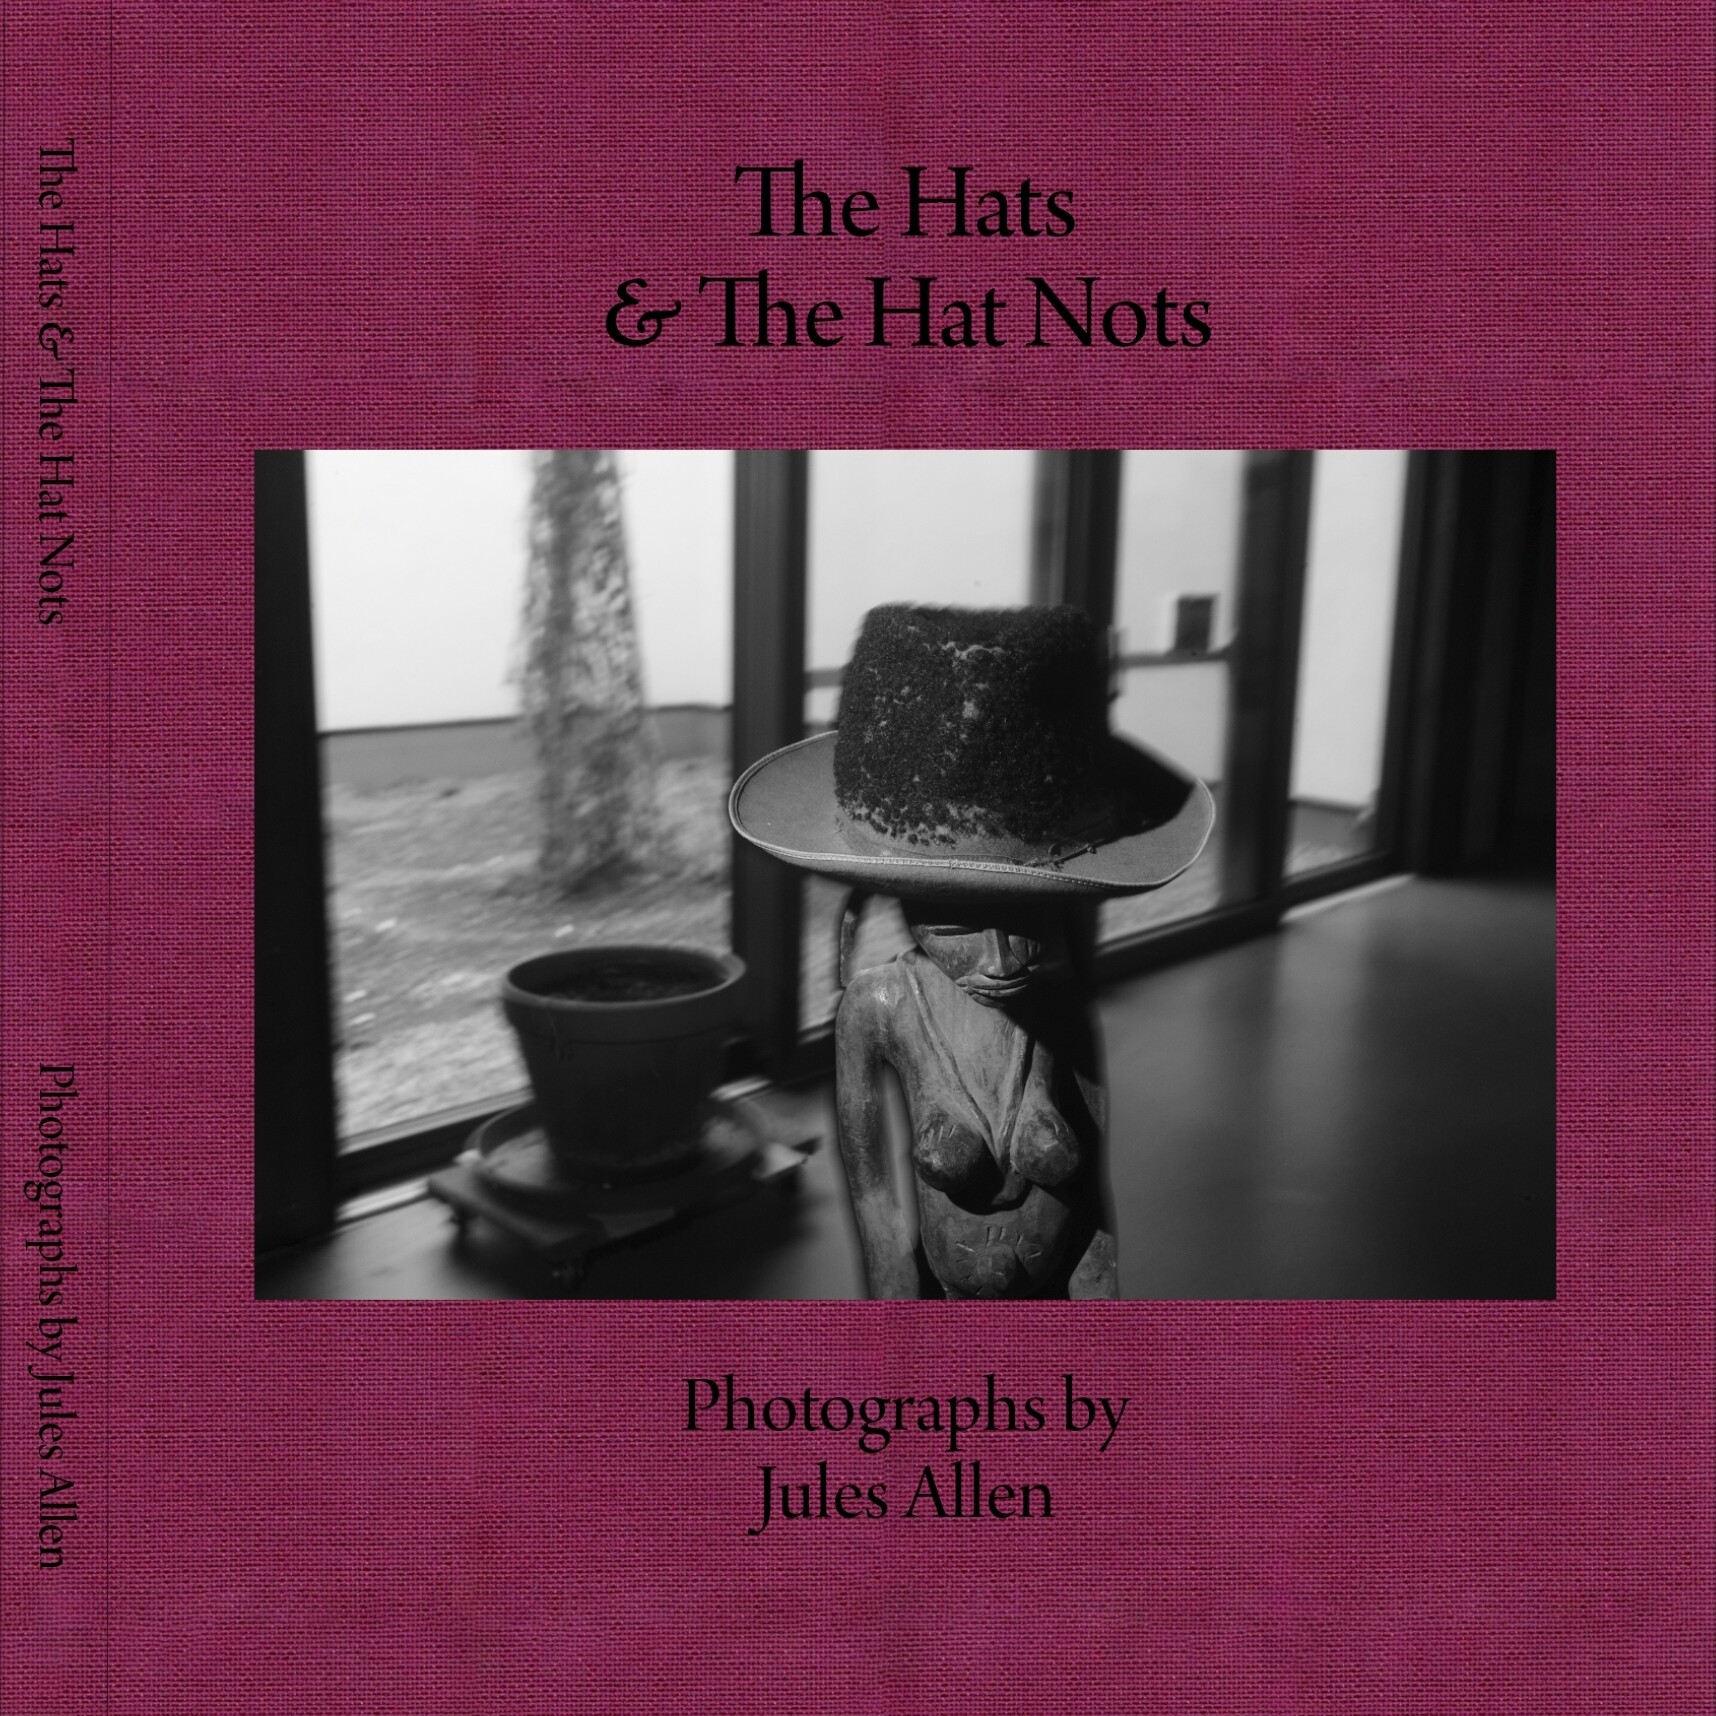 Jules Allen Books |Available for purchase via Jules Allen Photography Bookstore